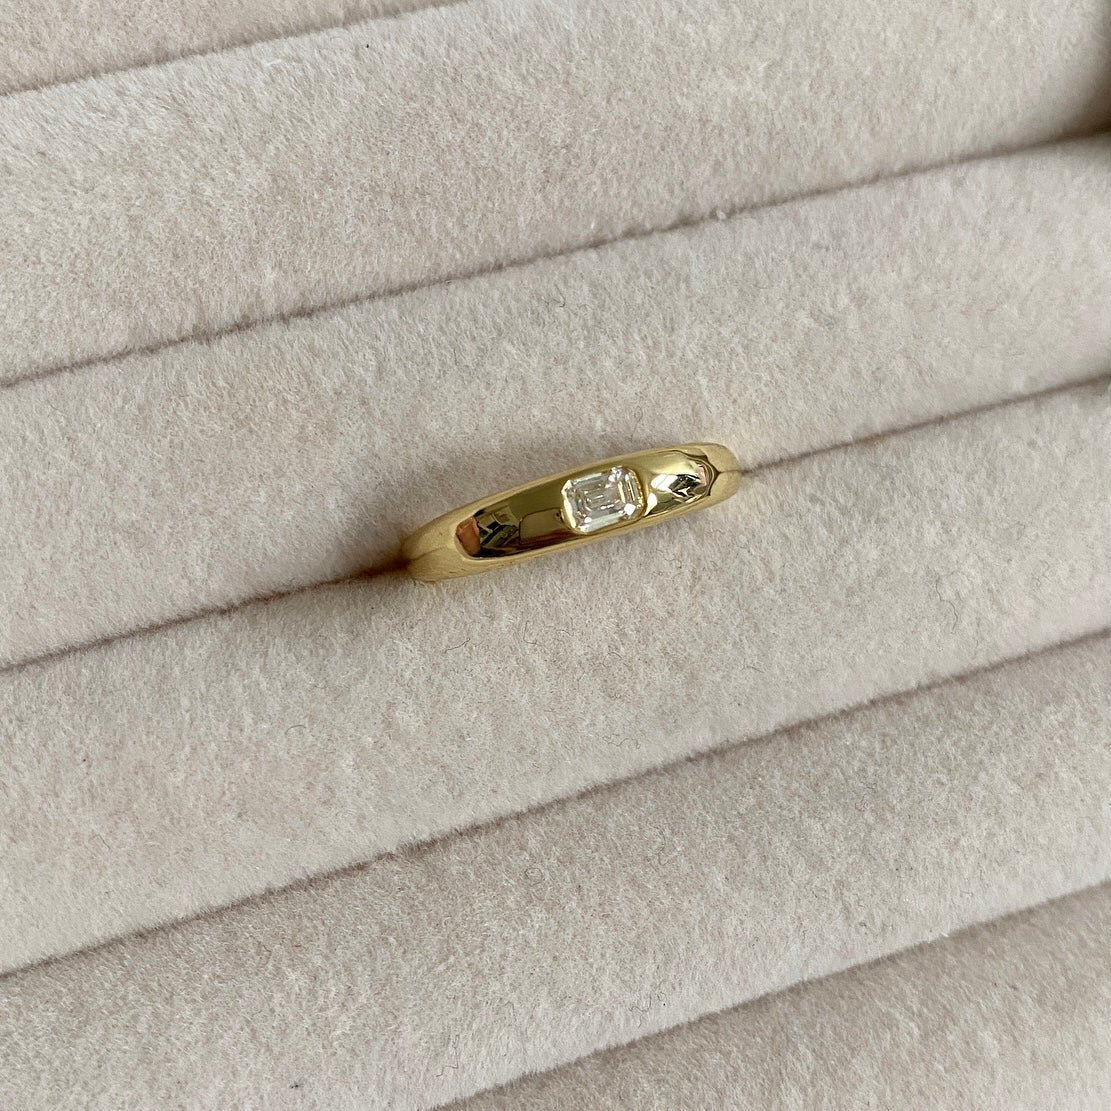 This stylish gold crystal ring is crafted with excellence, designed to energise your wardrobe with a subtle dose of sparkle. Its artful design radiates an understated radiance, allowing your glamour to shine through.  Details: Adjustable one size.